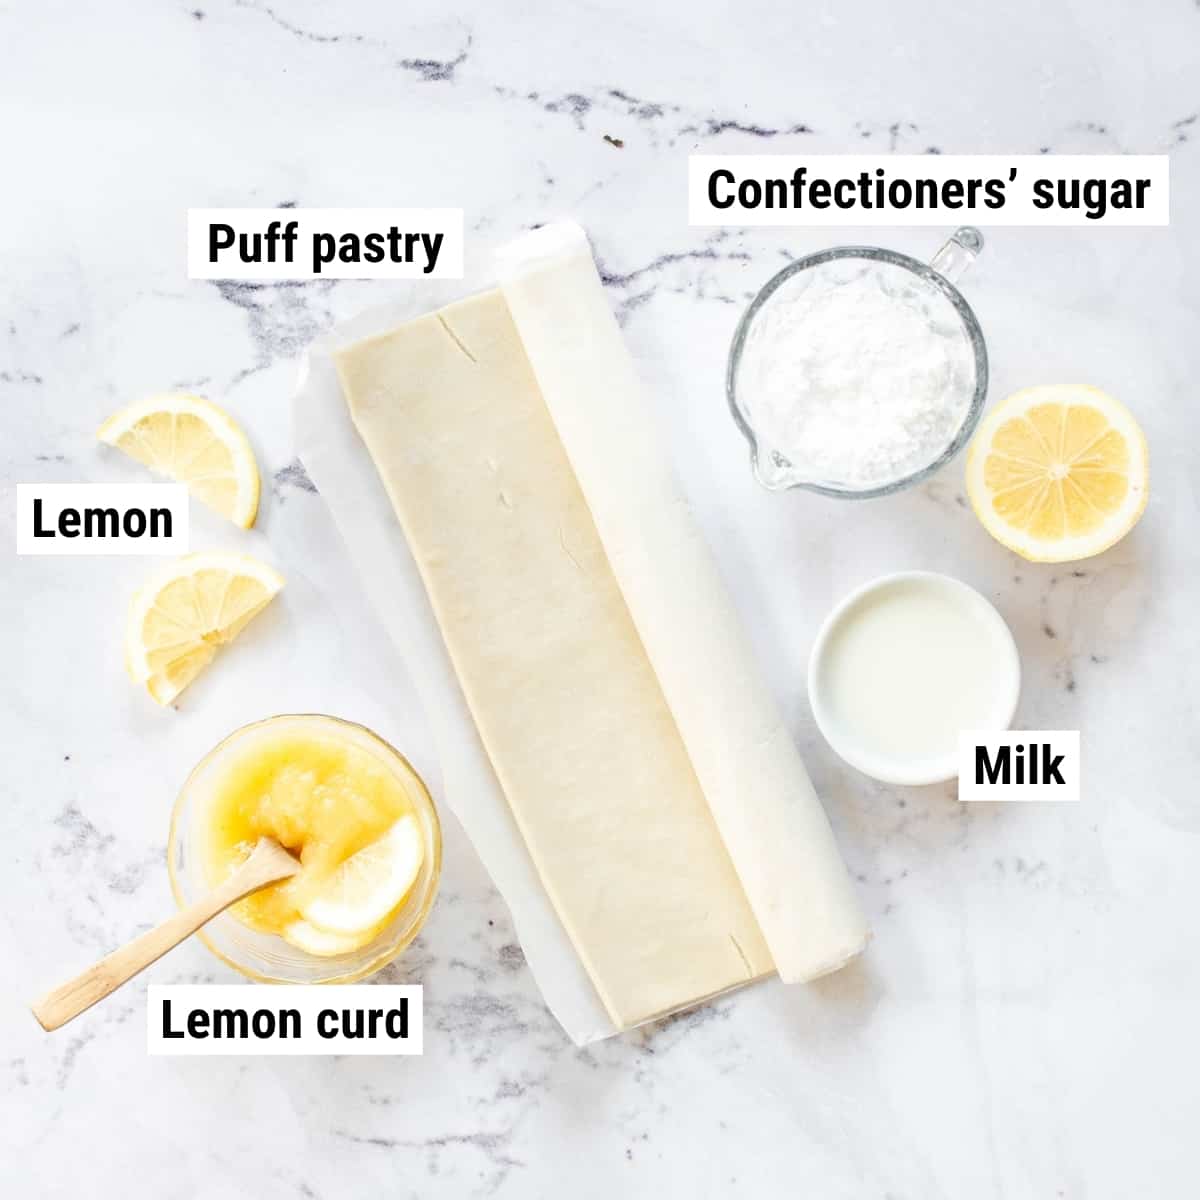 The ingredients to make lemon Danishes laid out on a table.